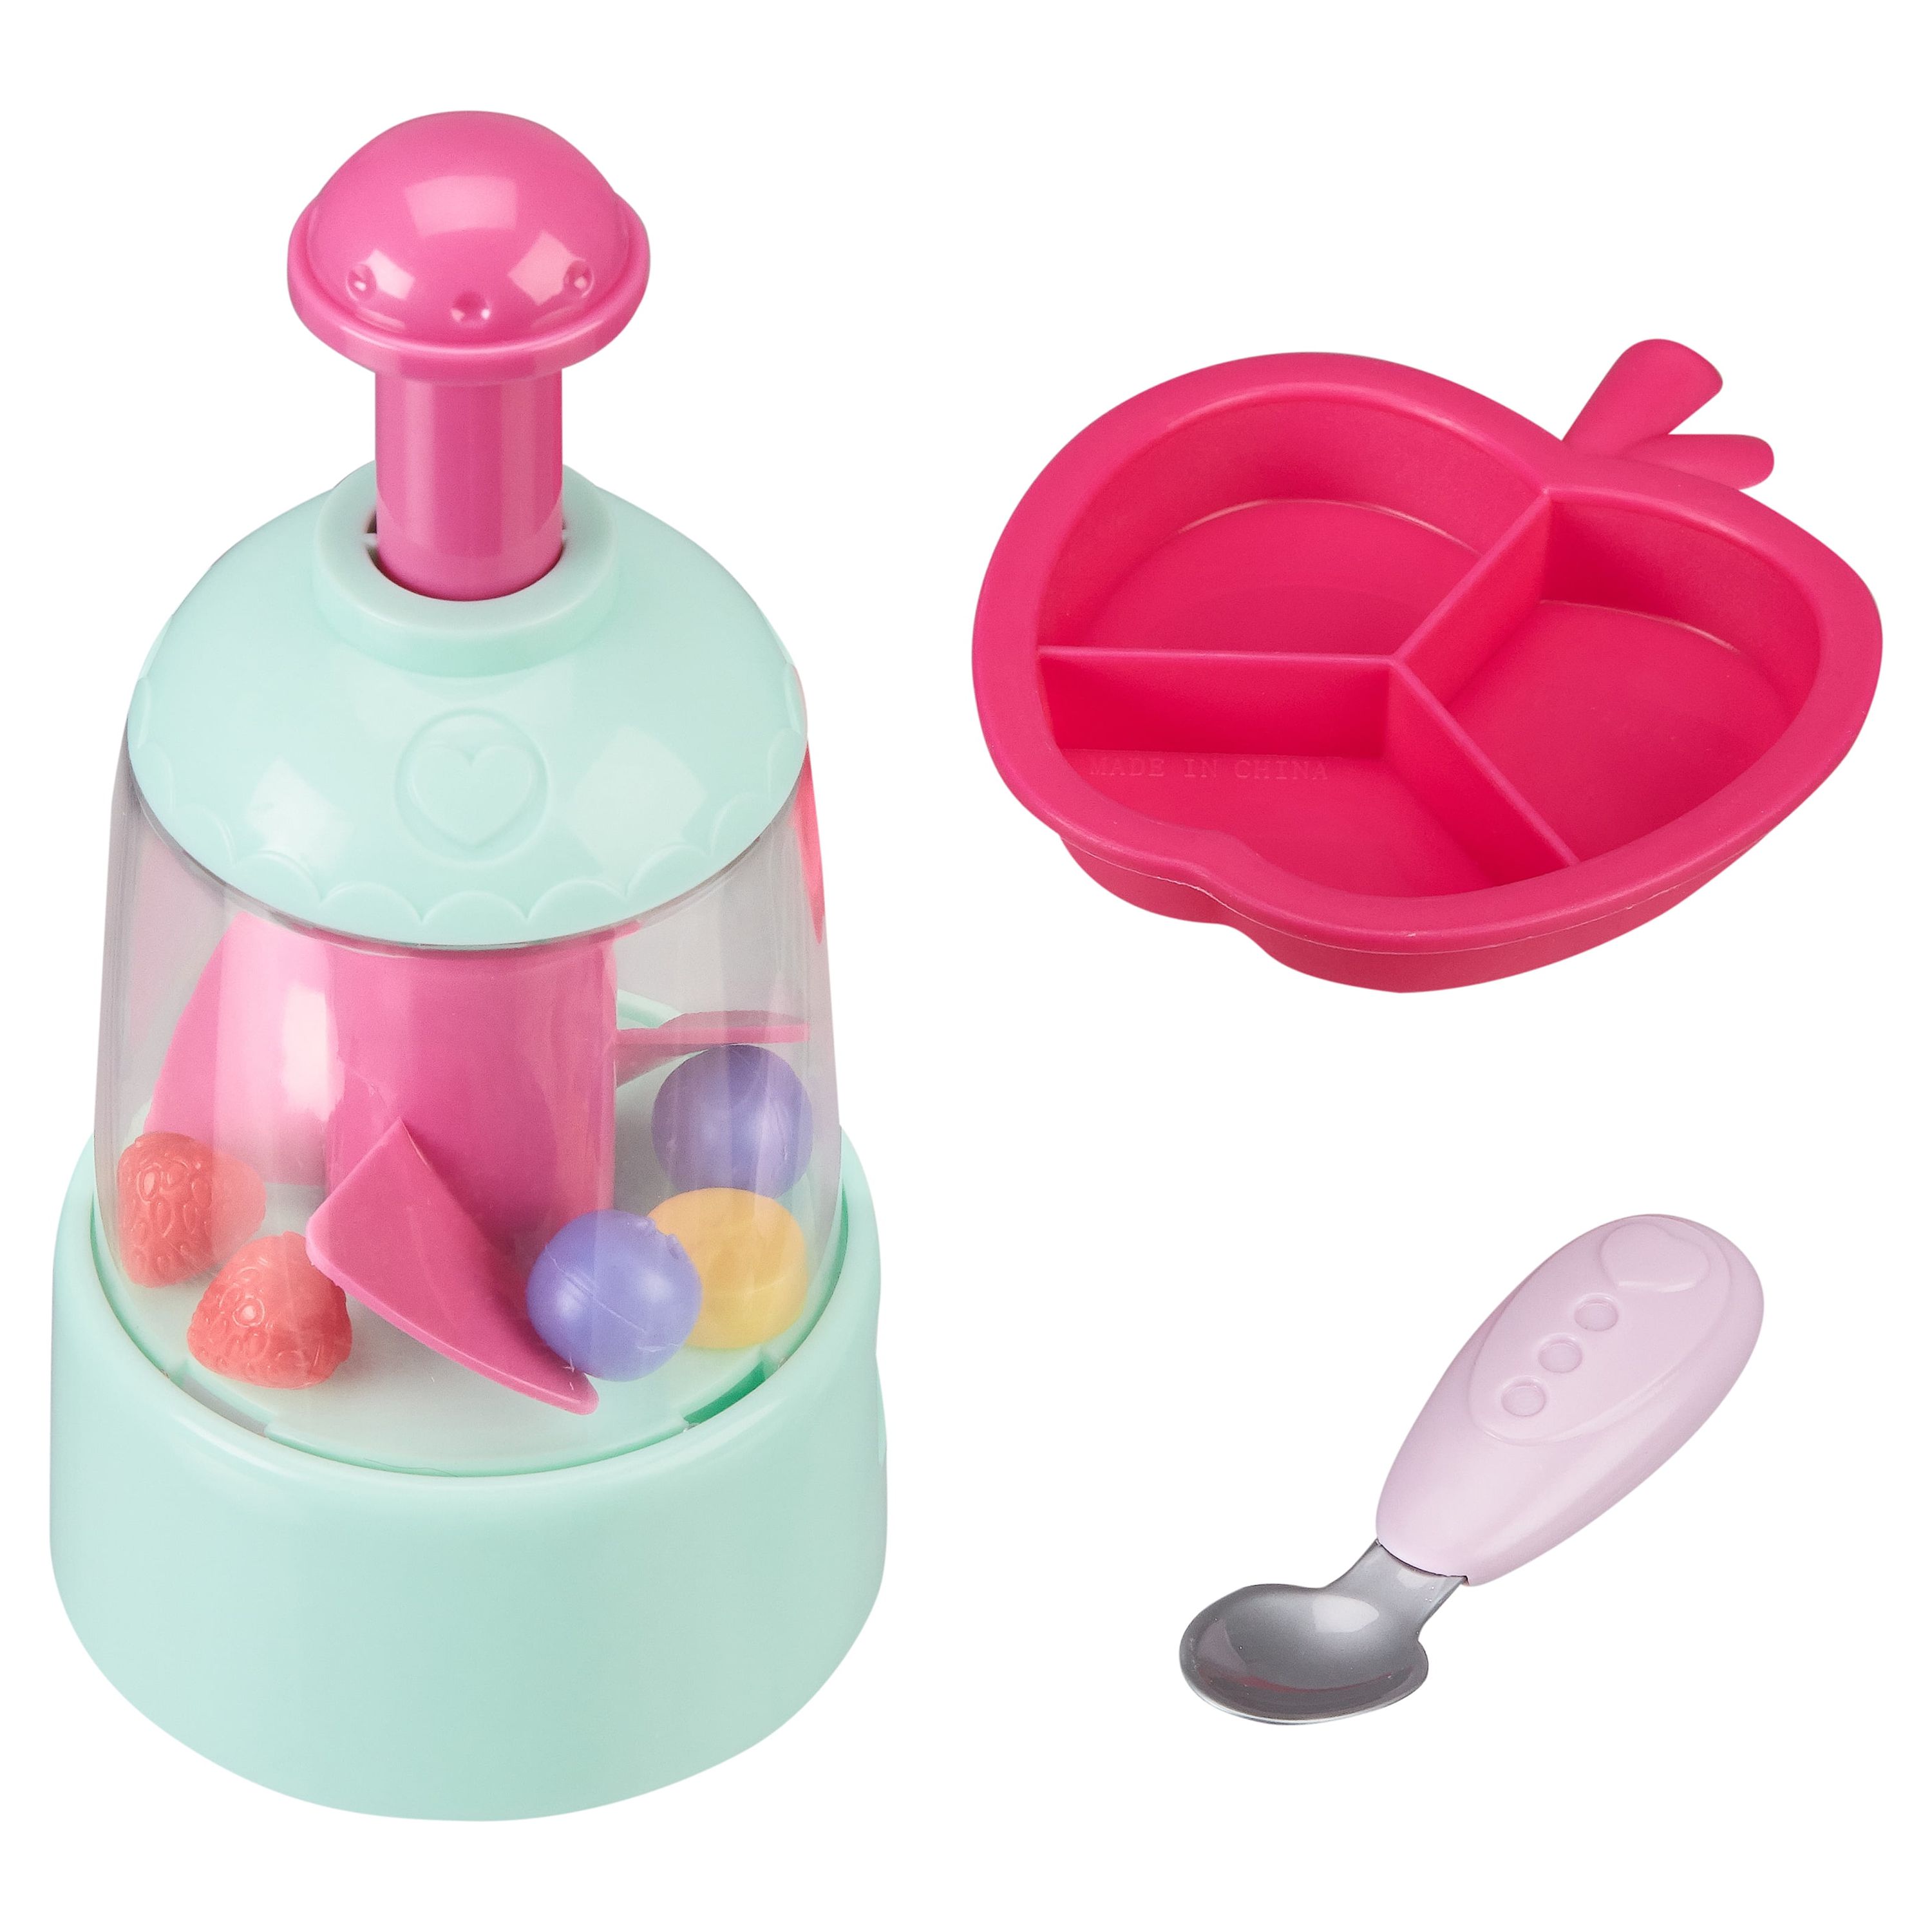 My Sweet Love Food Blender Toy Accessory Play Set, 9 Pieces - image 1 of 5